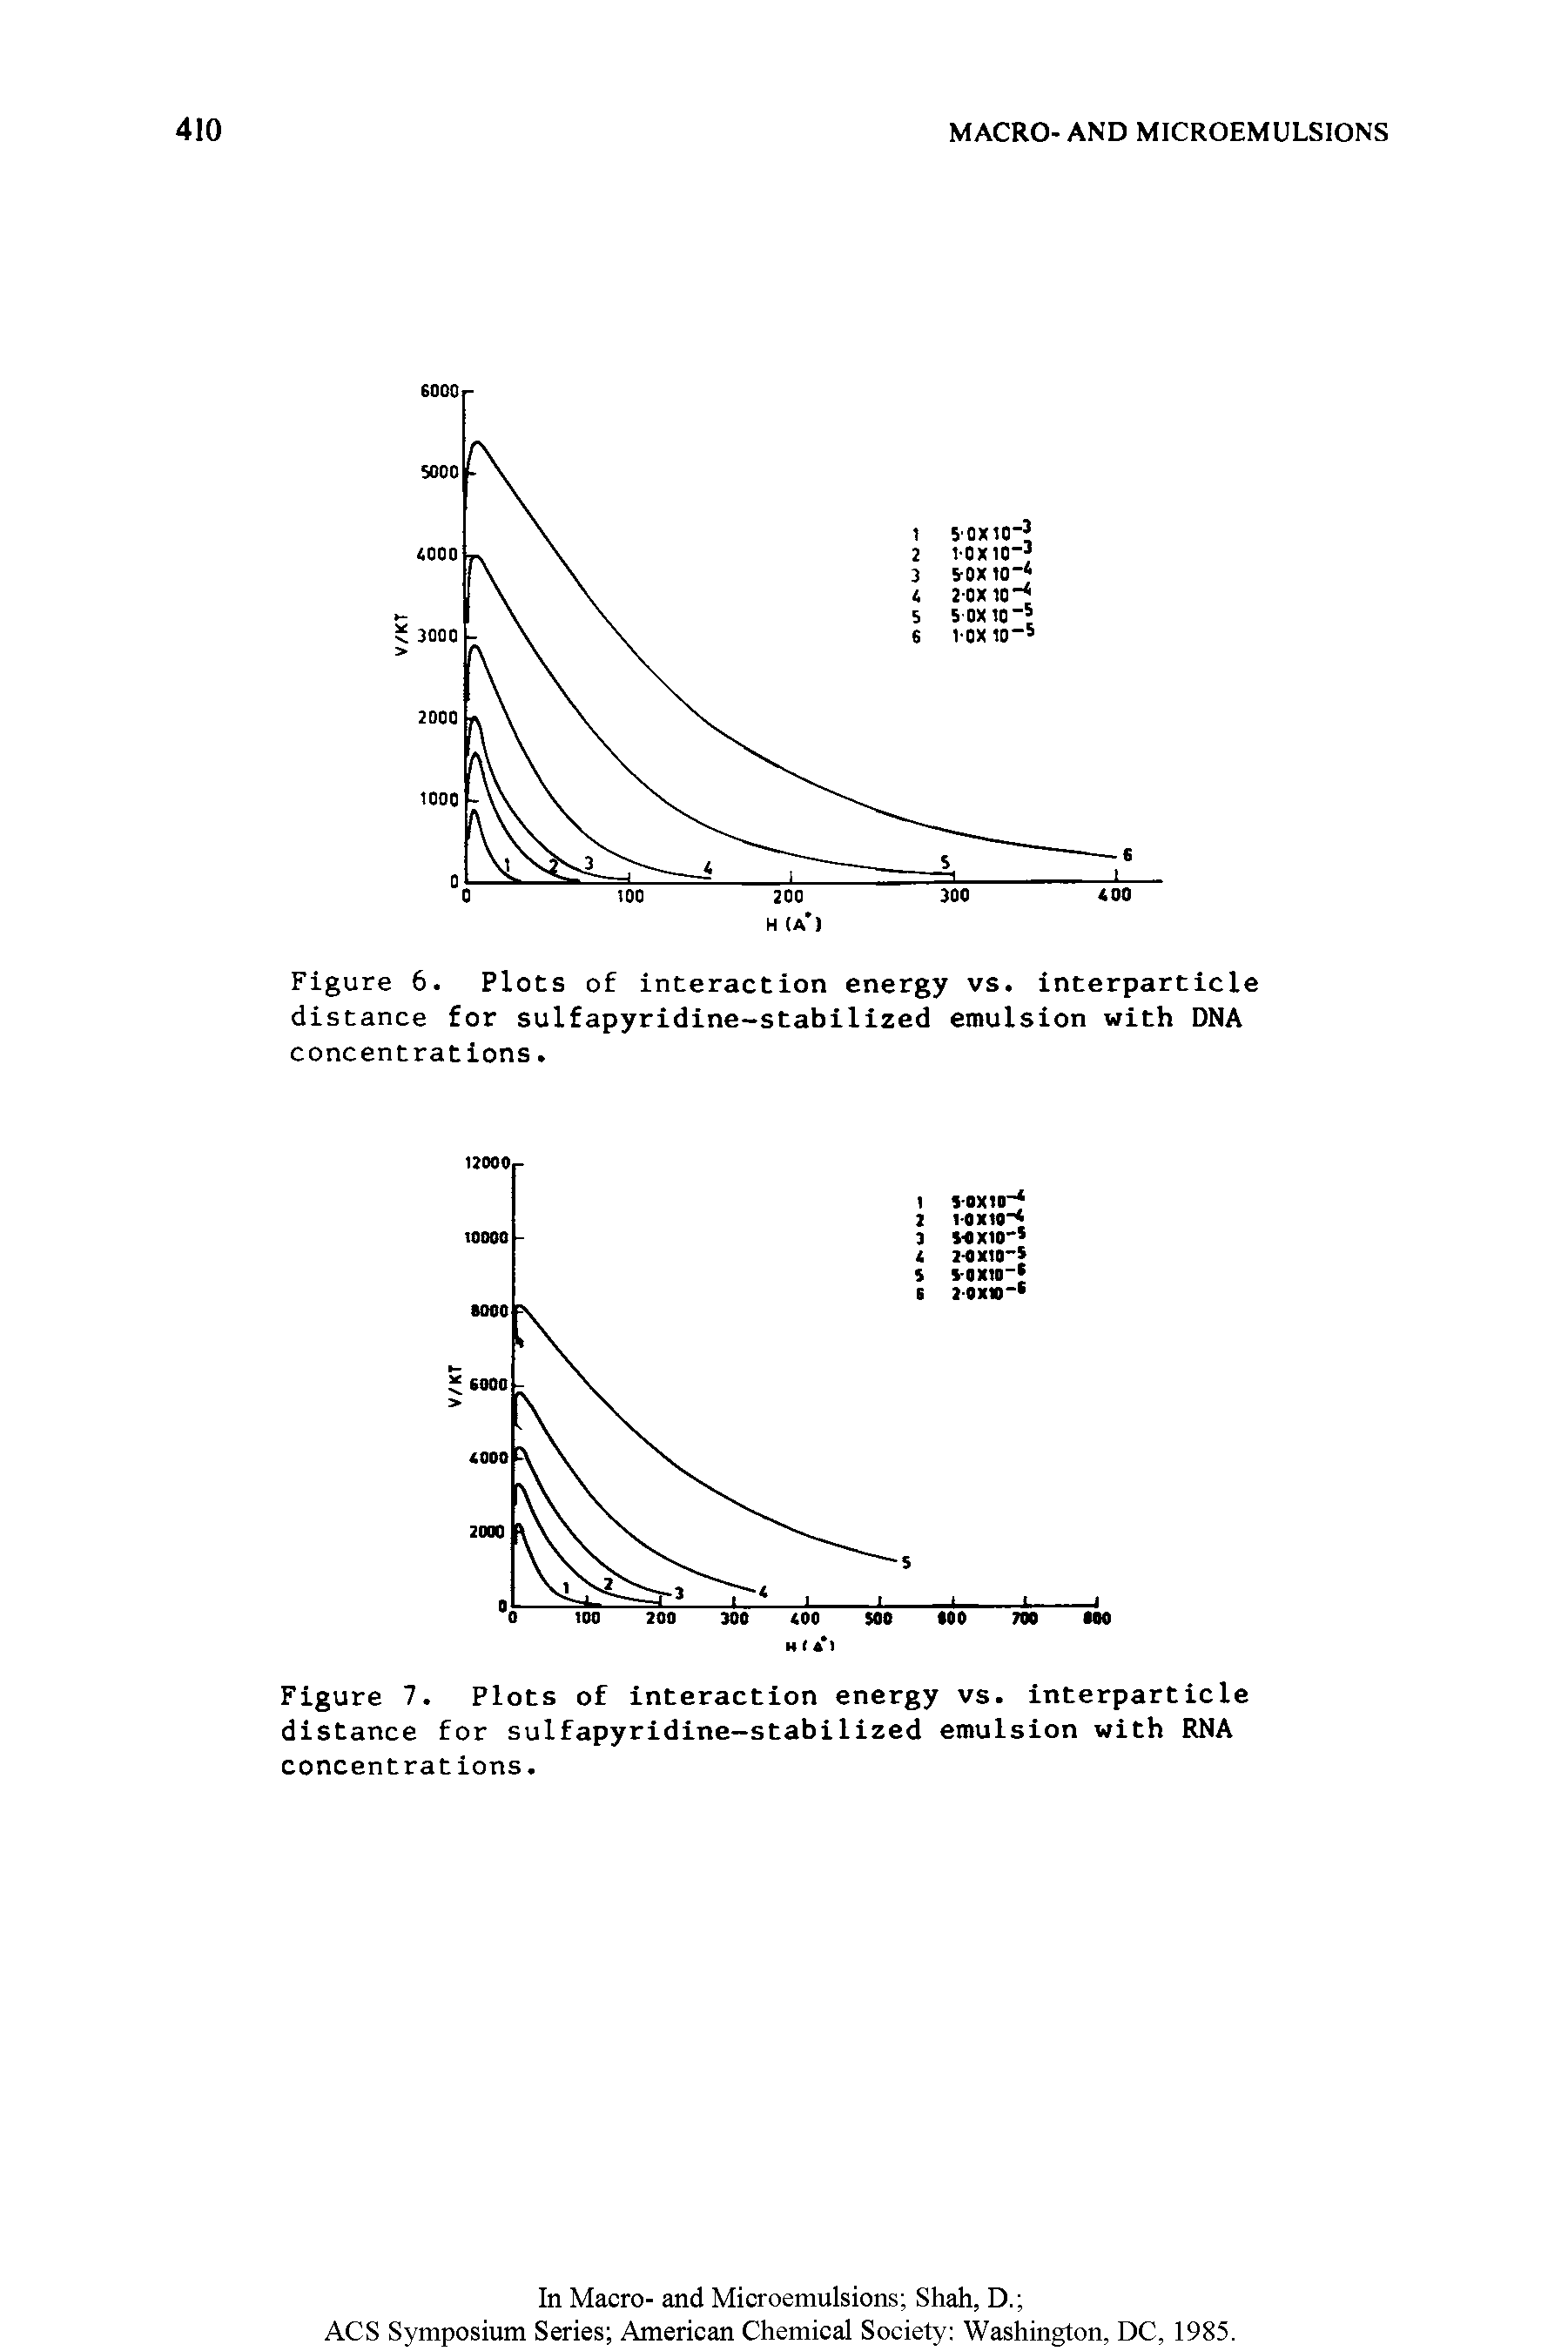 Figure 6. Plots of interaction energy vs. interparticle distance for sulfapyridine-stabilized emulsion with DNA concentrations.